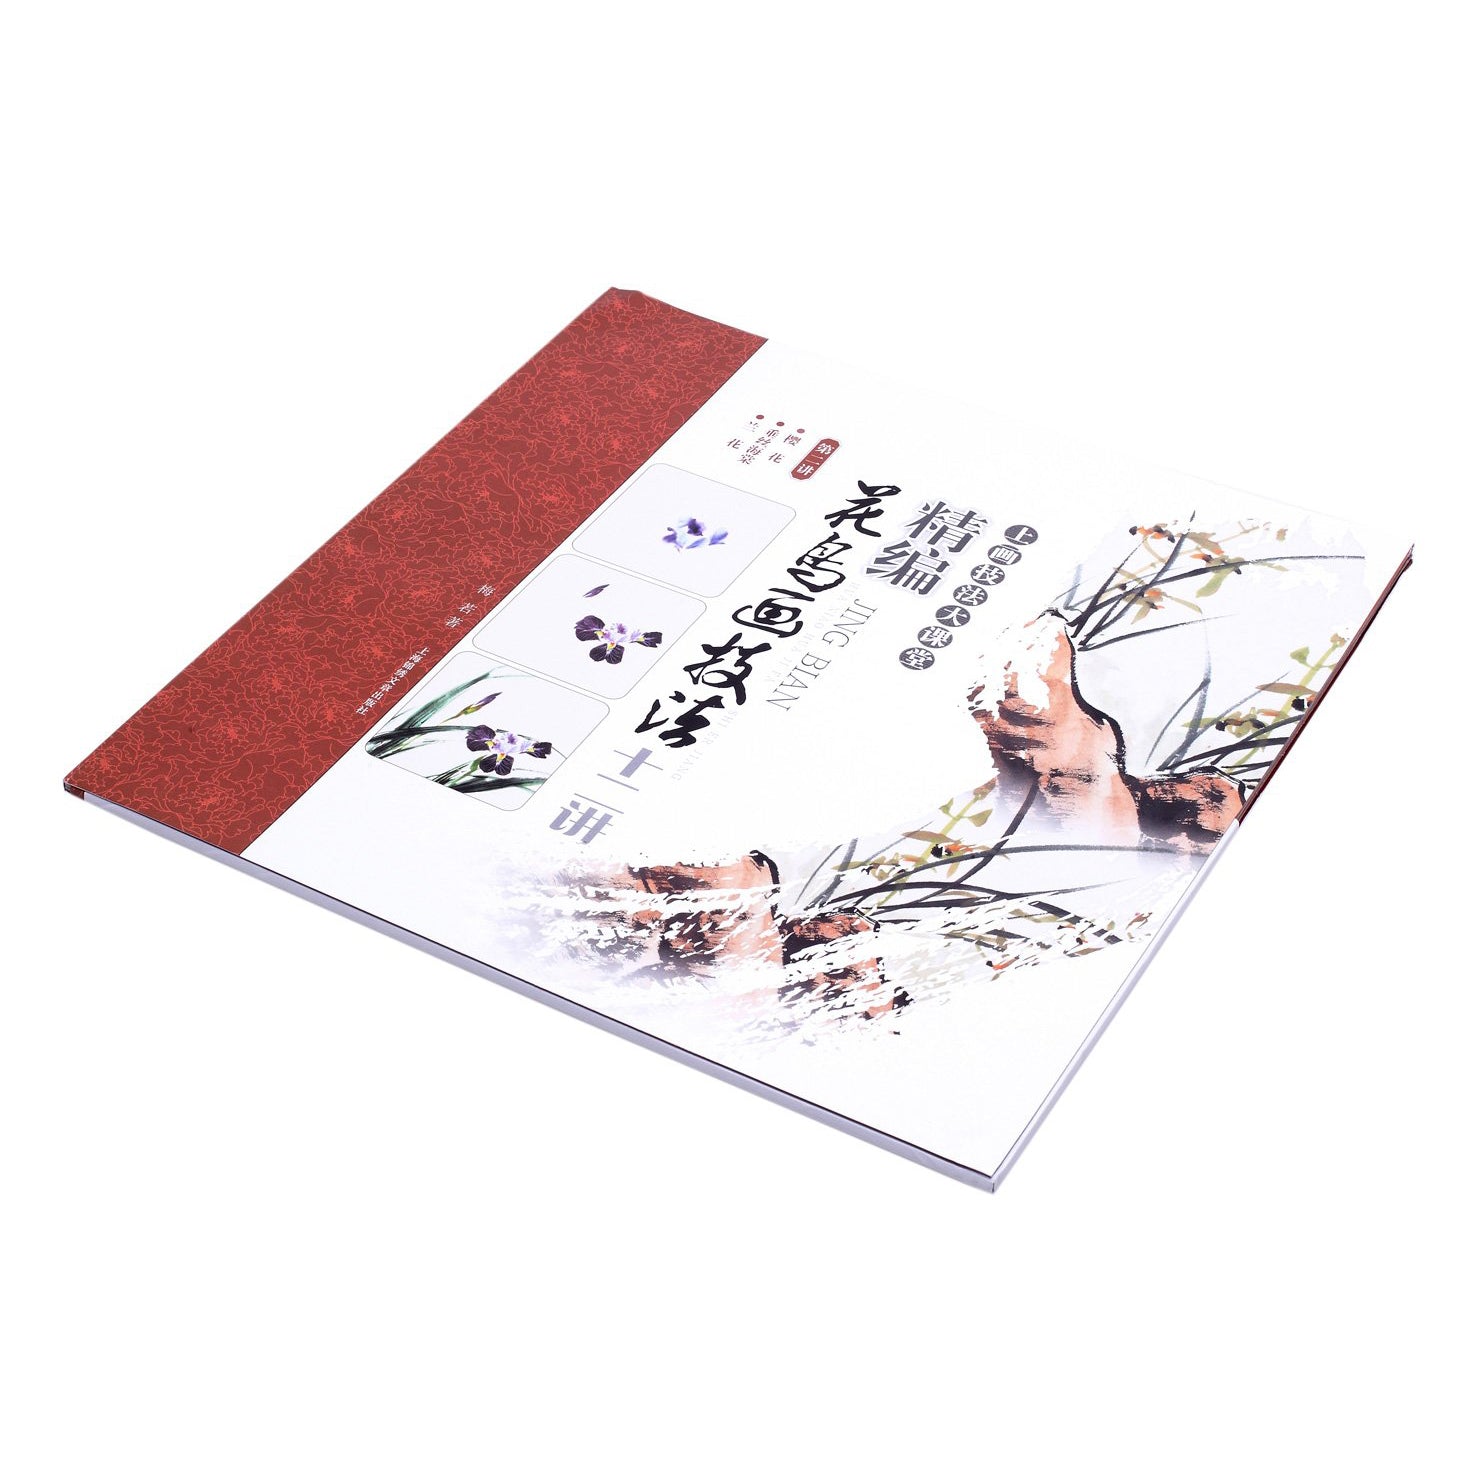 This deck of instructional cards is all about painting three of the most beautiful flowers - the Orchid, Flowering Crabapple and the Japanese Cherry Blossom